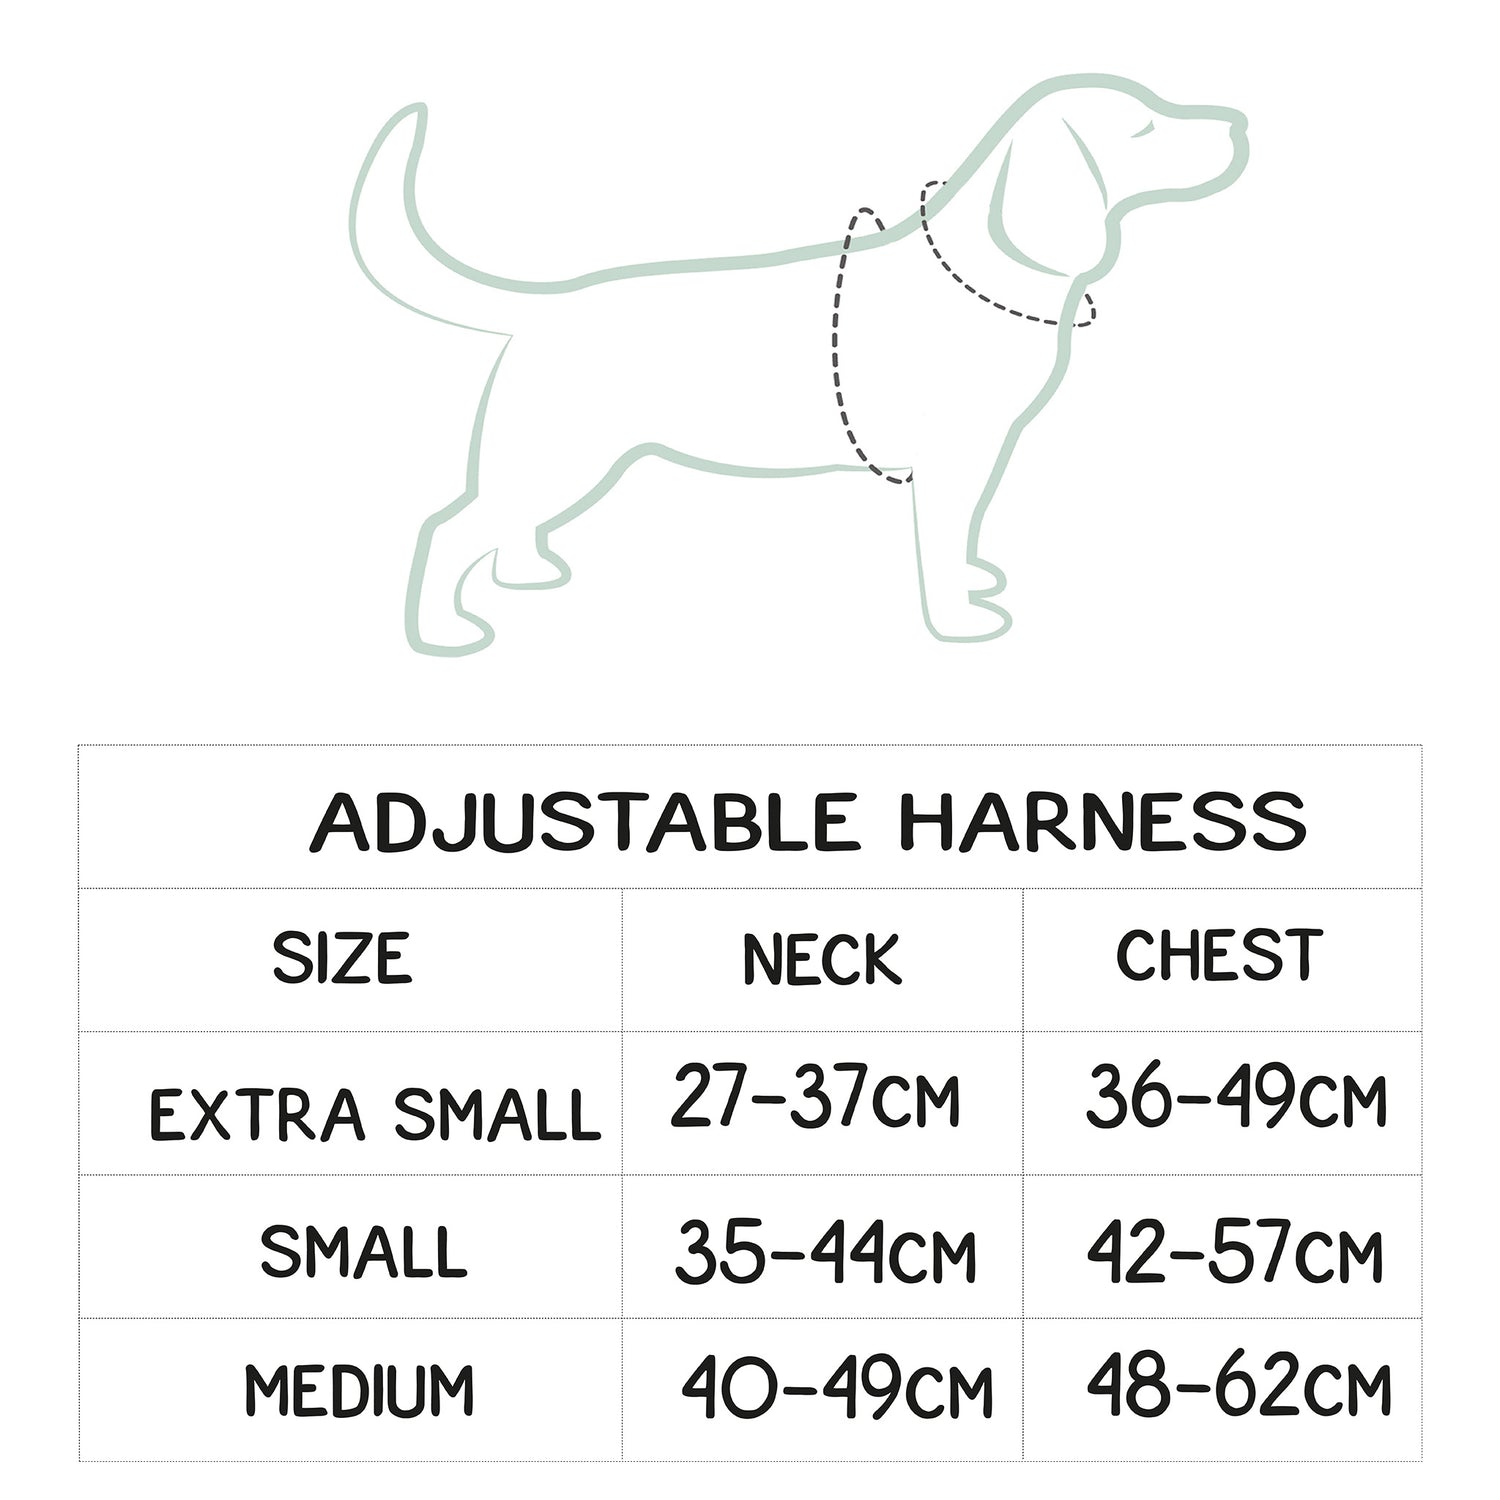 Harness size guide